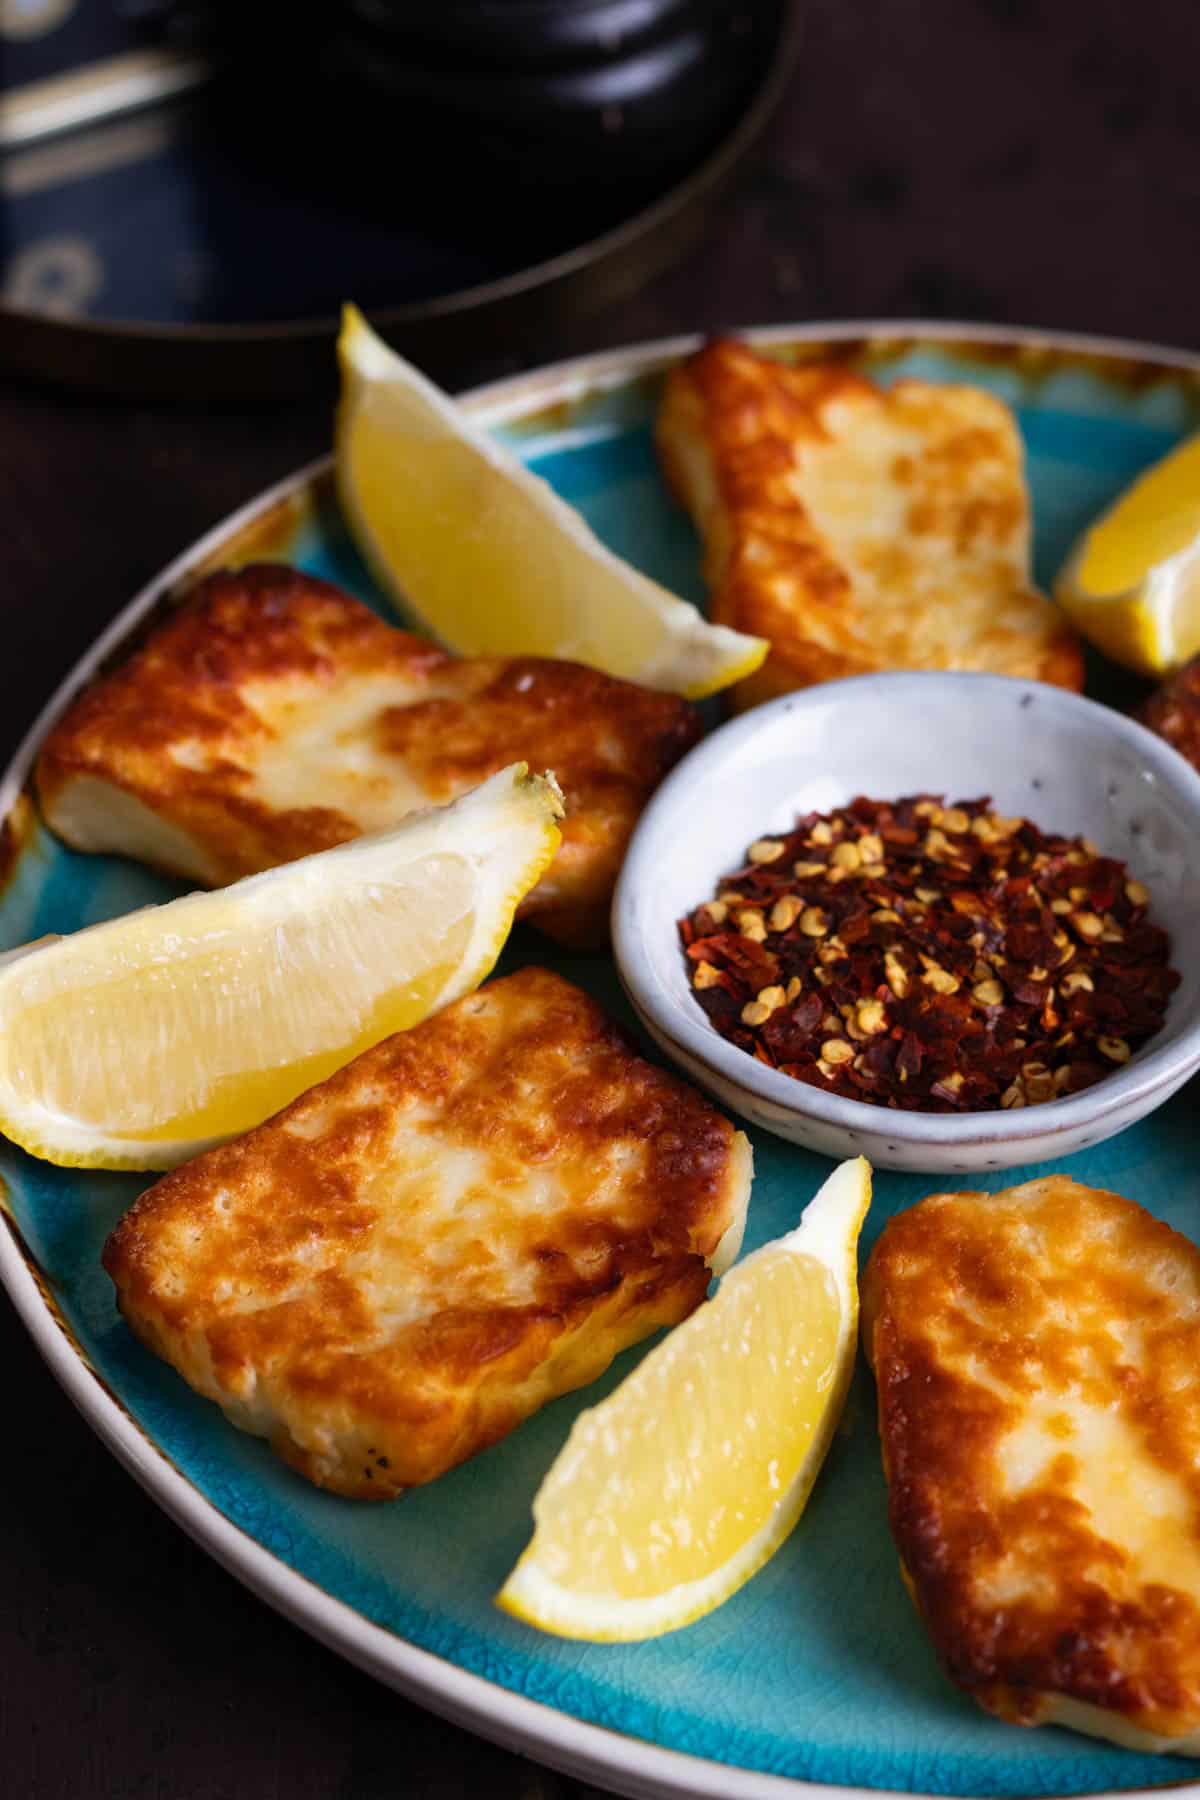 Air fried halloumi on a blue plate with lemon wedges and chili flakes.